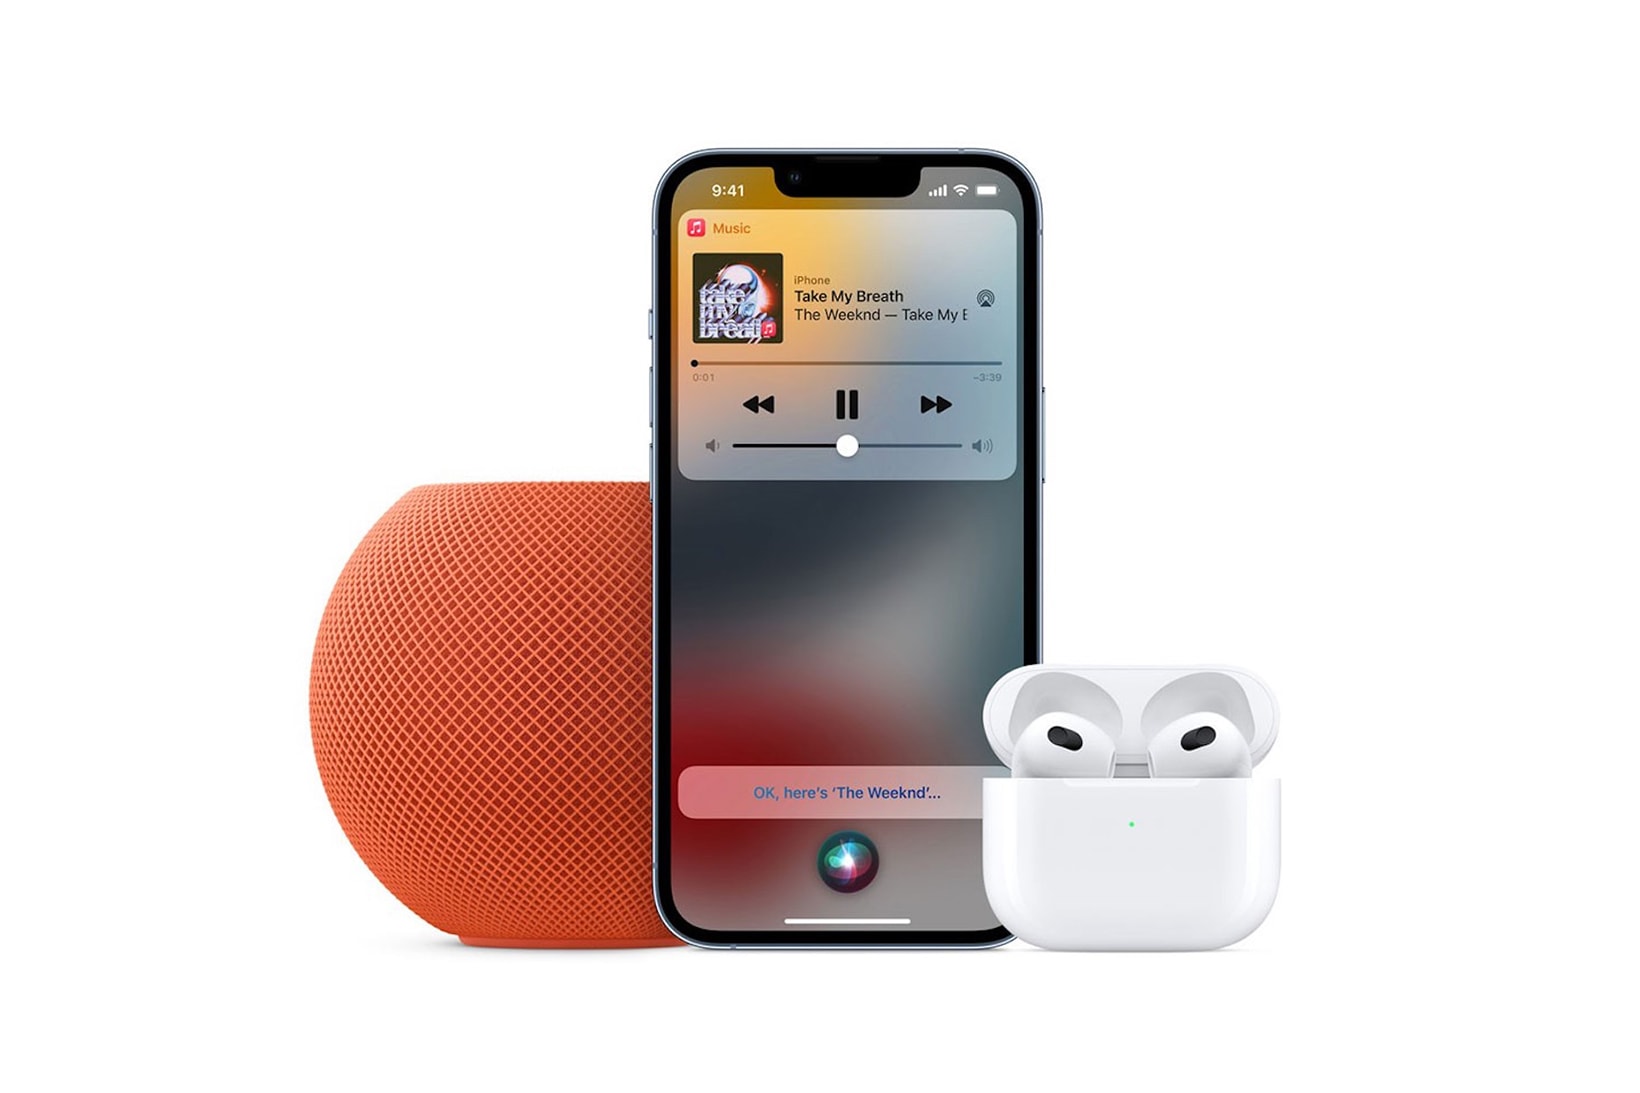 apple music subscription plan homepod mini airpods iphone